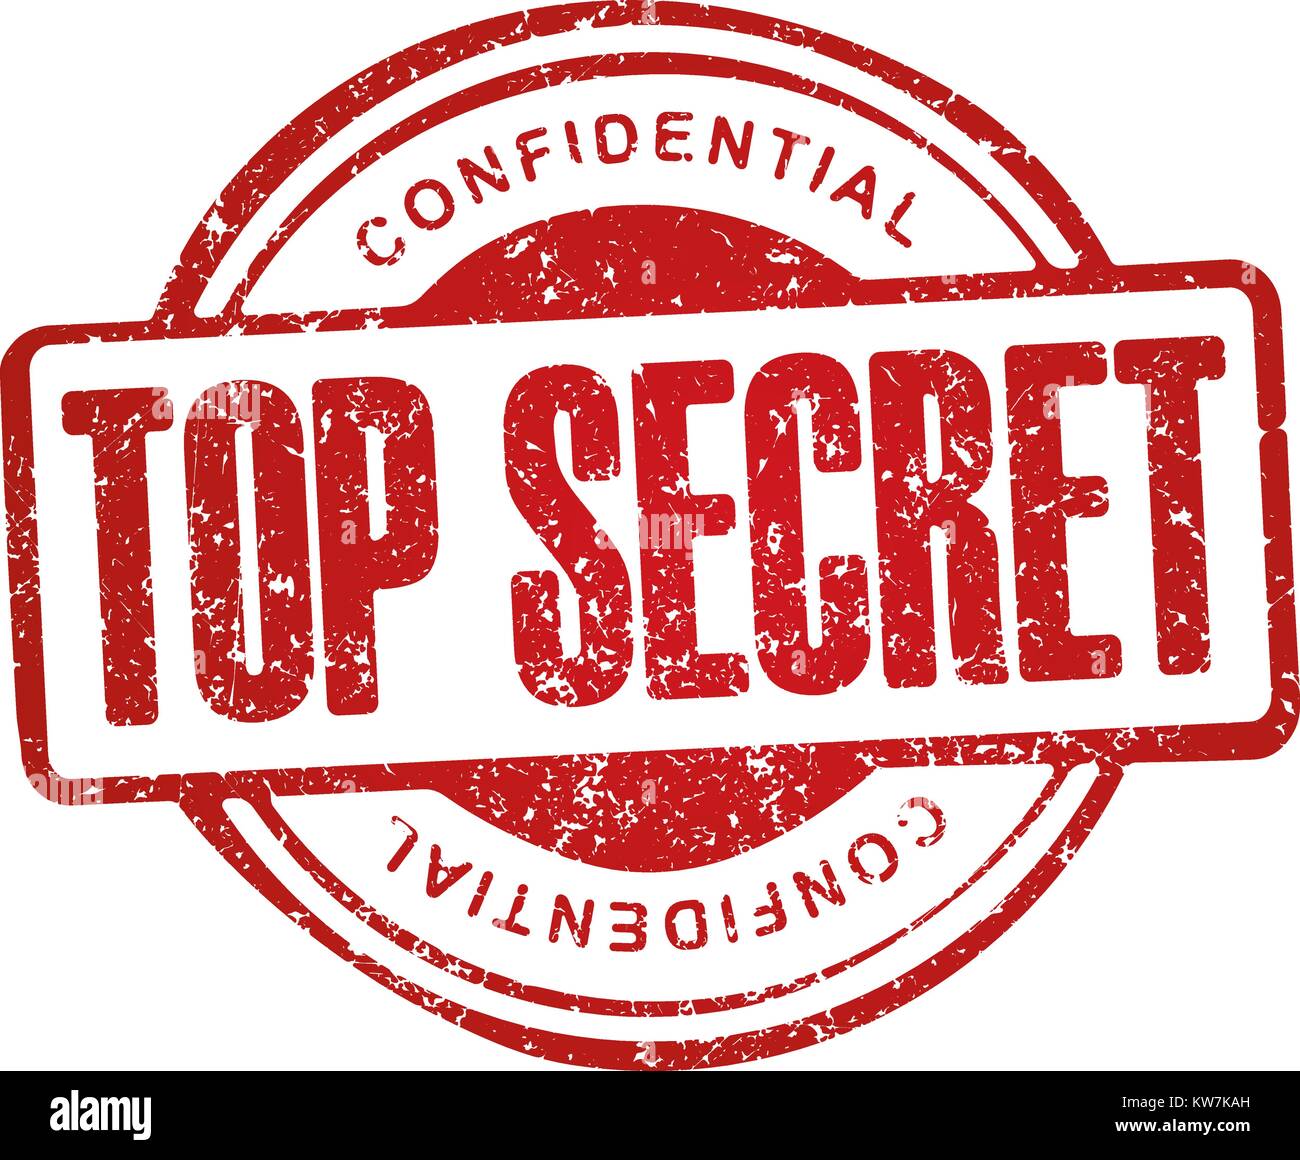 Top secret, confidential. Grunge style red rubber stamp. Stock Vector